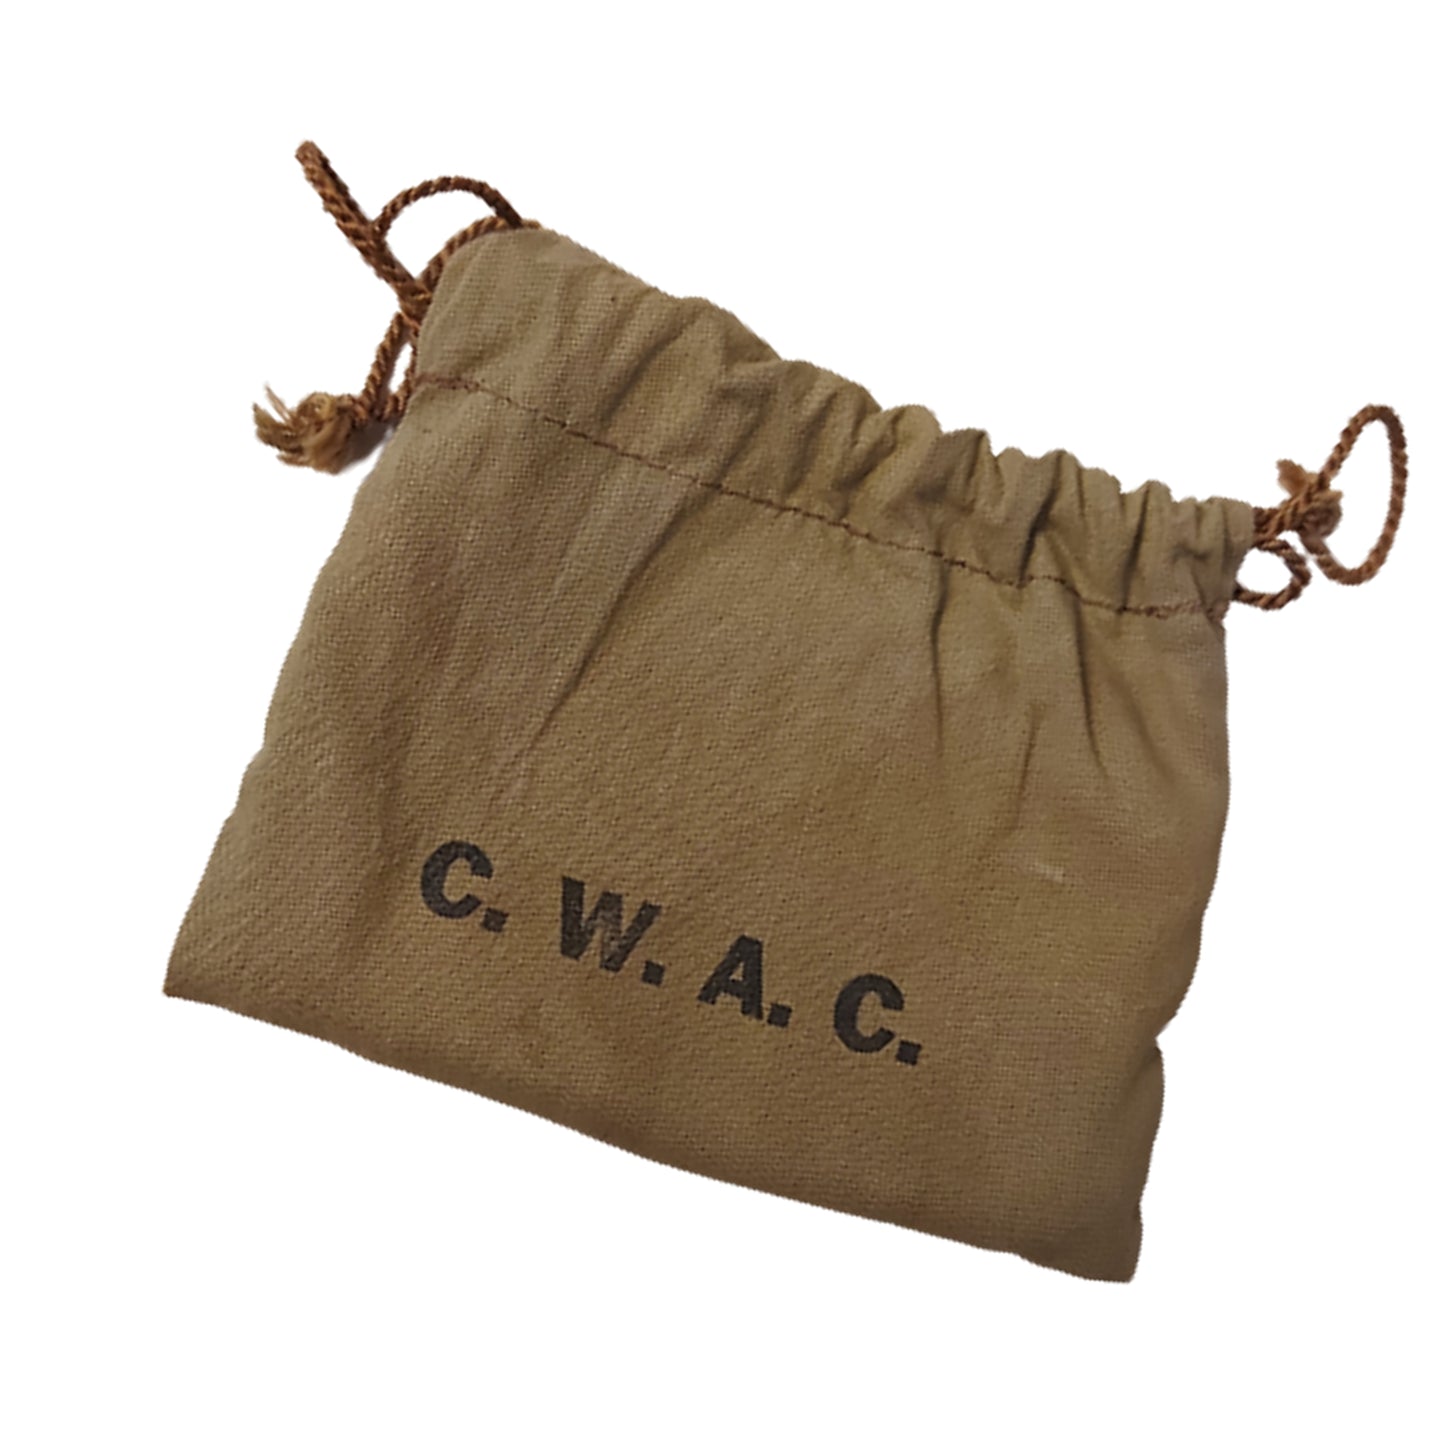 WW2 CWAC Canadian Women's Army Corps Clothes Line Kit